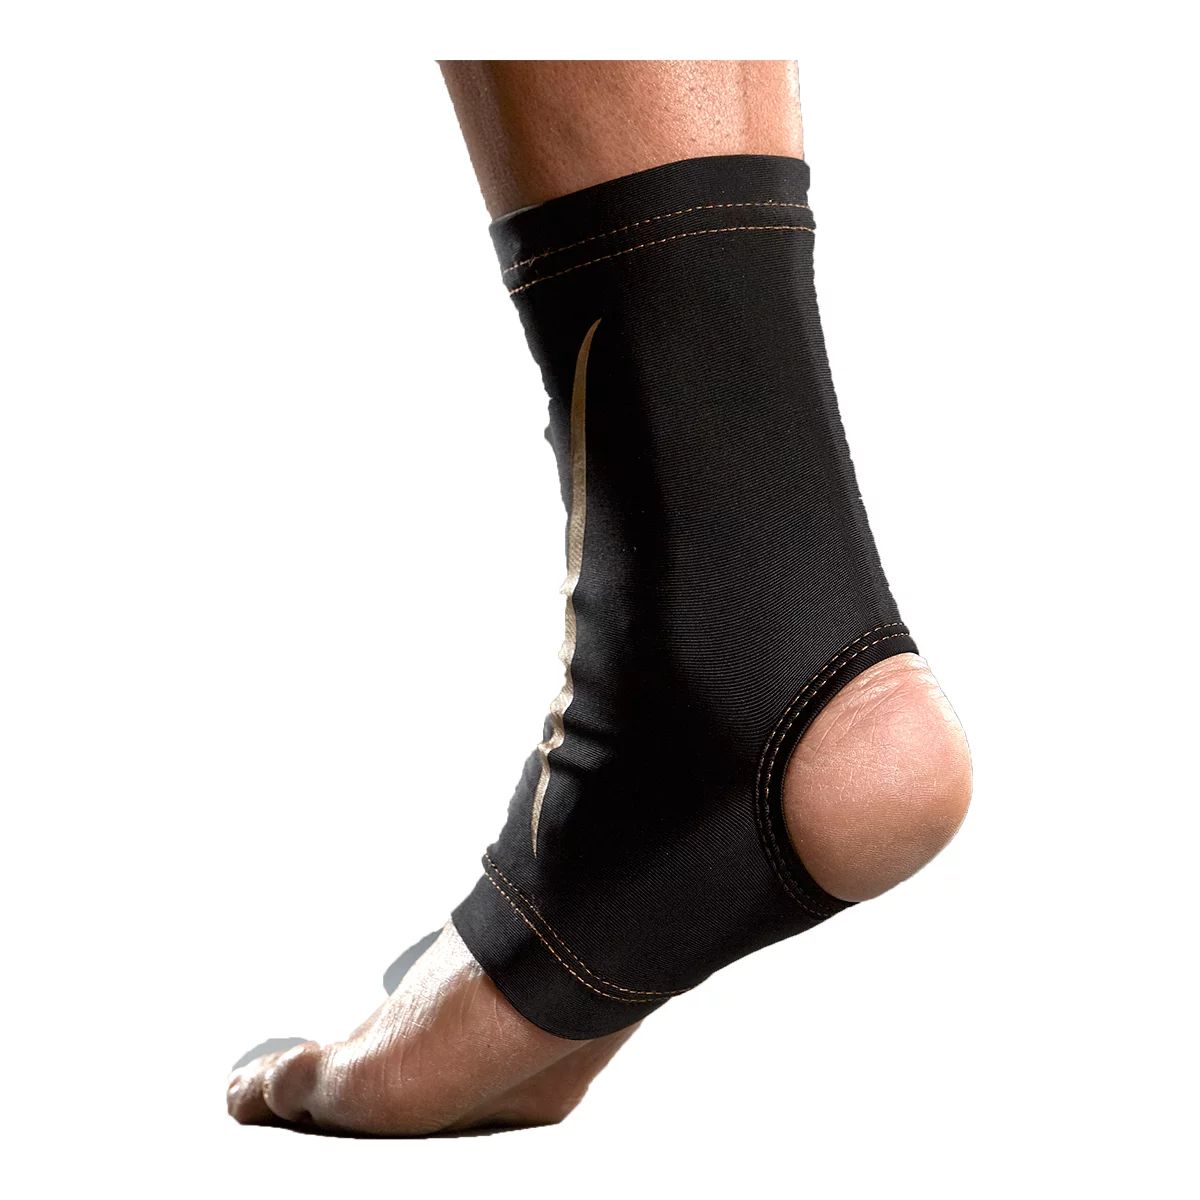 Tommie Copper Compression Ankle Sleeve - Black